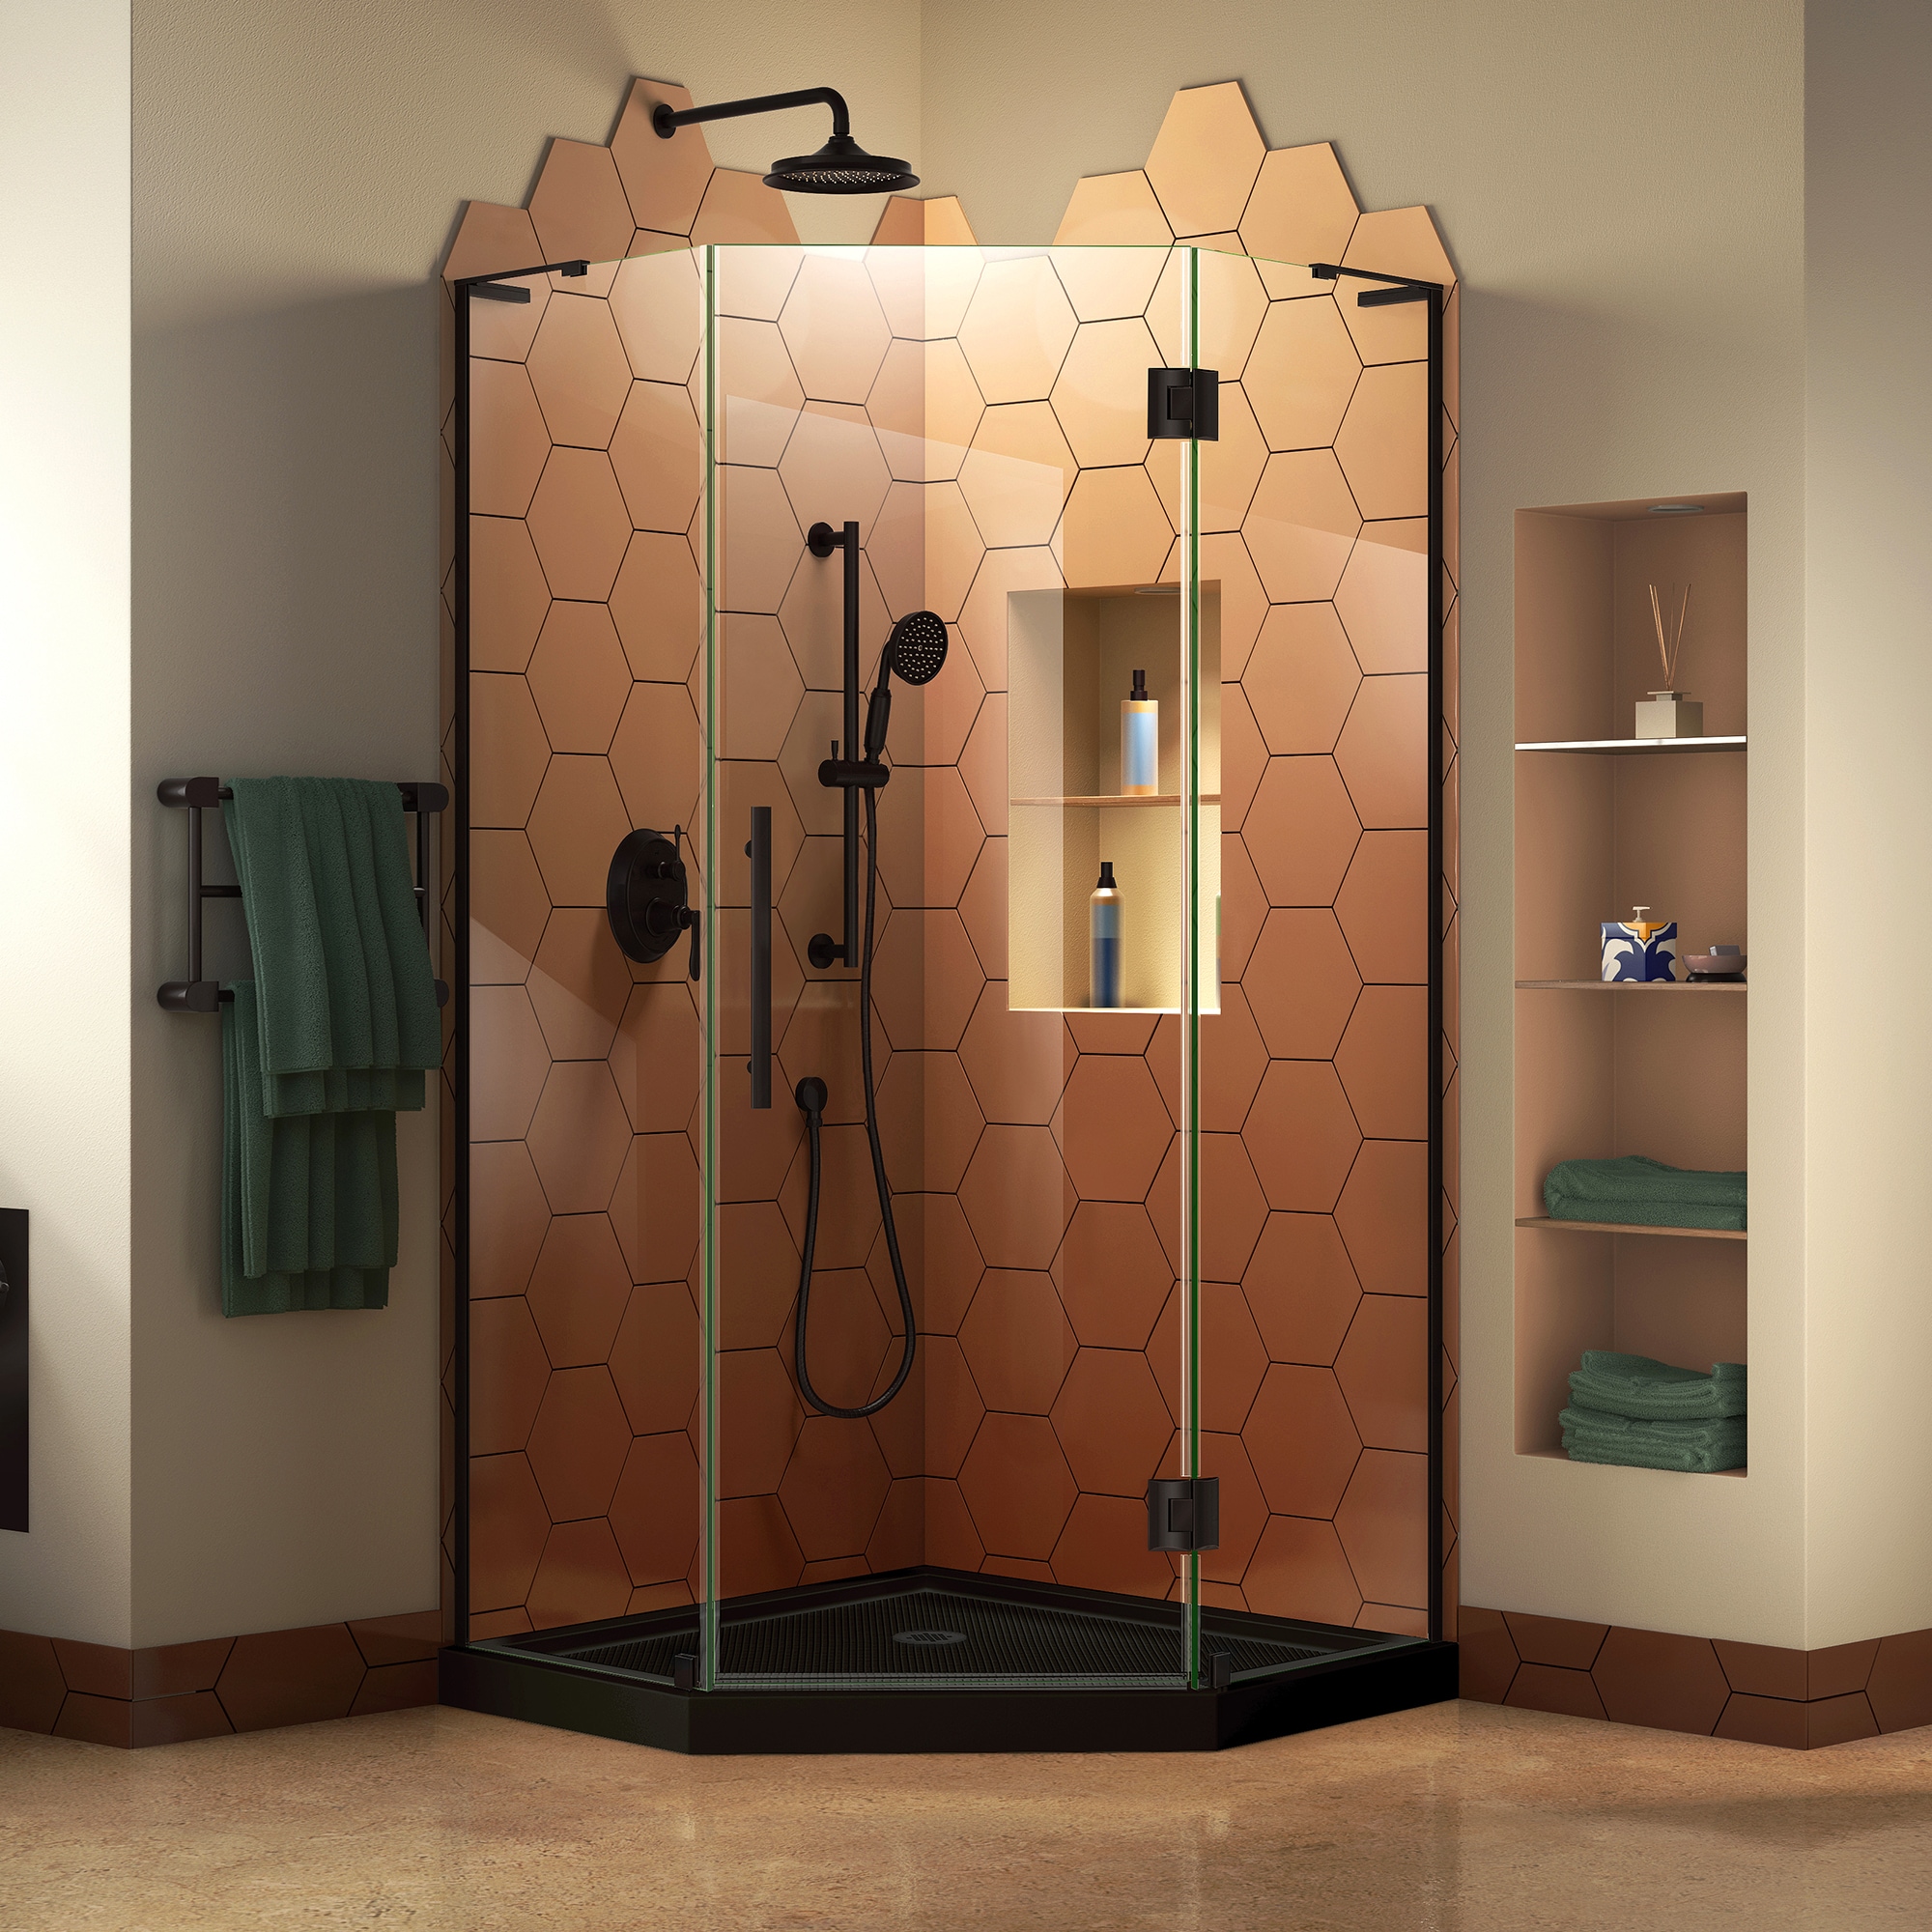 SUNNY SHOWER Corner Shower Enclosure with 1/4 in. Clear Glass Double Glass  Sliding Square Shower Doors 36 x 36 x 72 inch, Chrome Finish, Shower Base